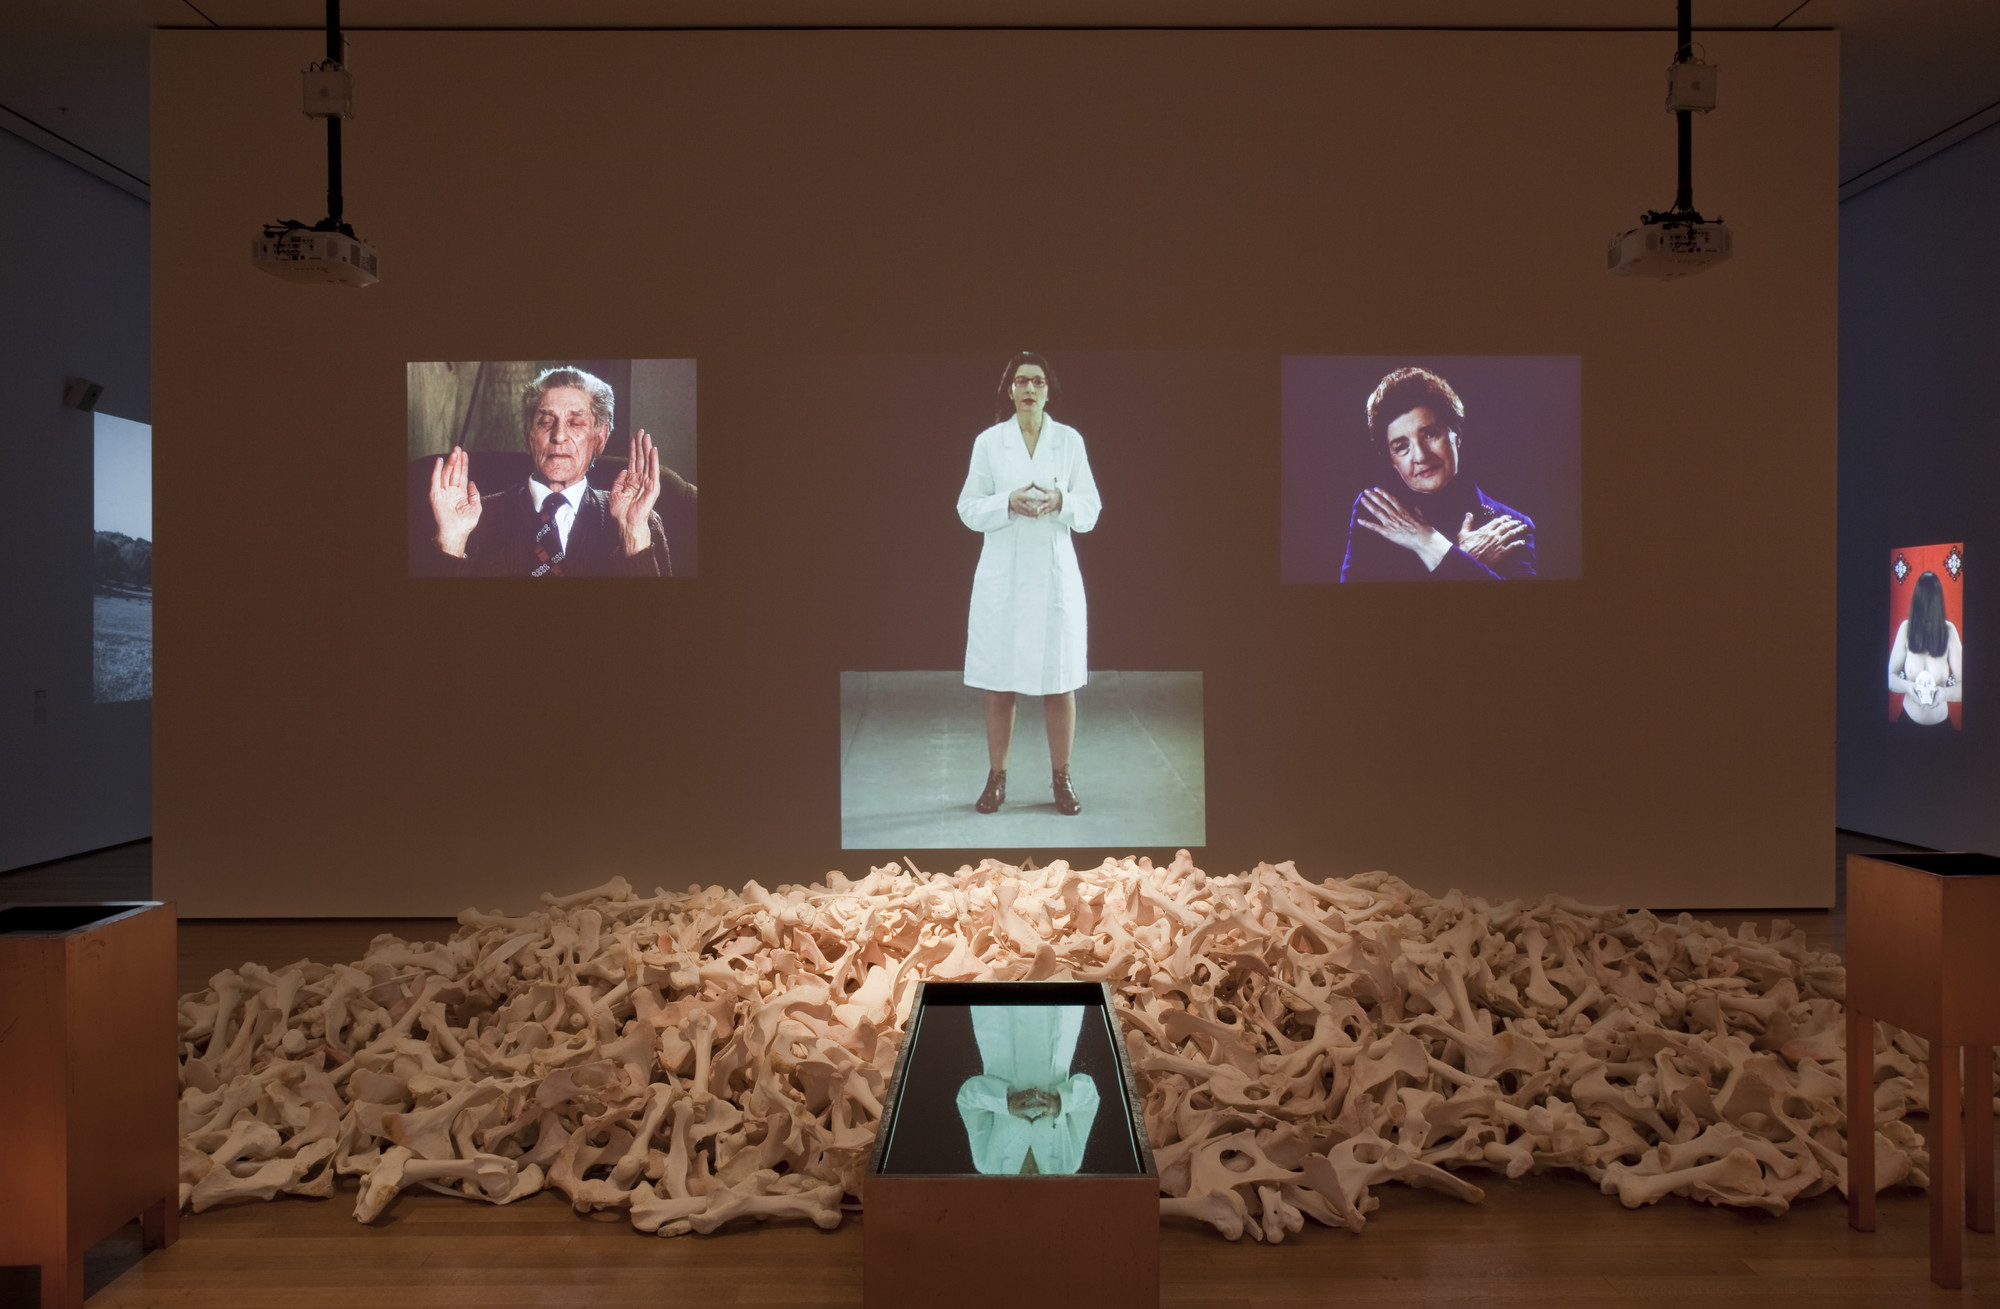 Installation view of the exhibition "Marina Abramović The Artist is